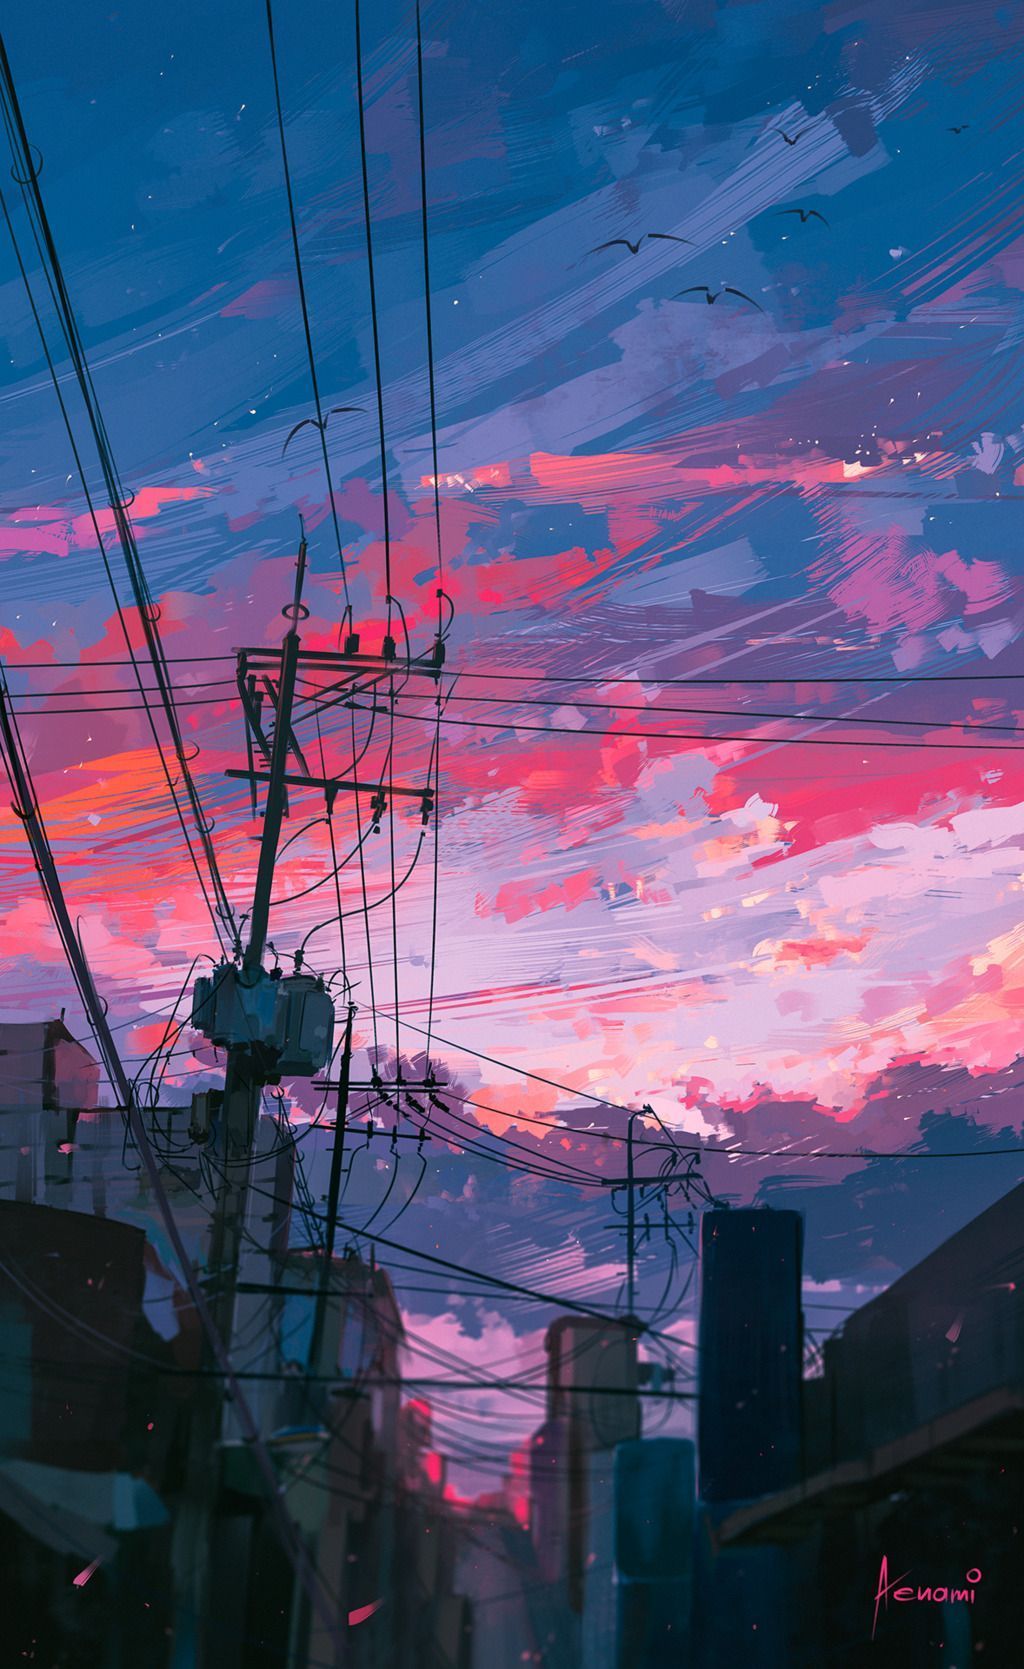 42+] Aesthetic Wallpapers Anime